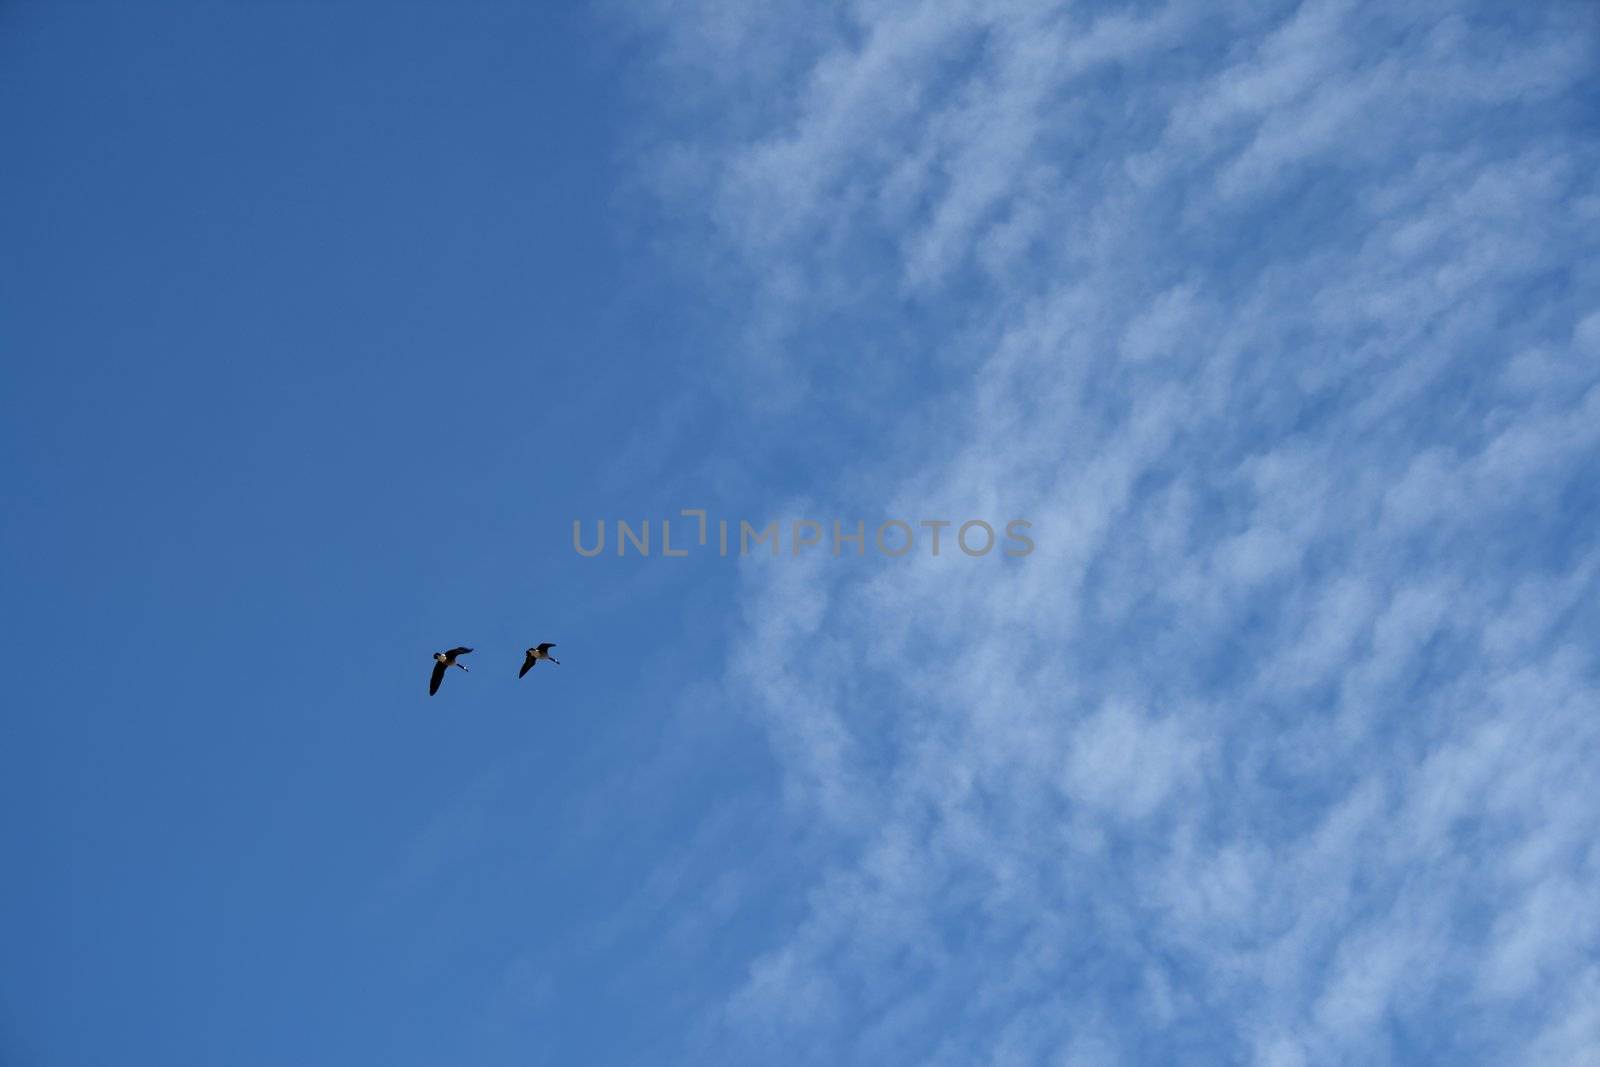 Two wild geese in the blue sky, reaching the clouds.